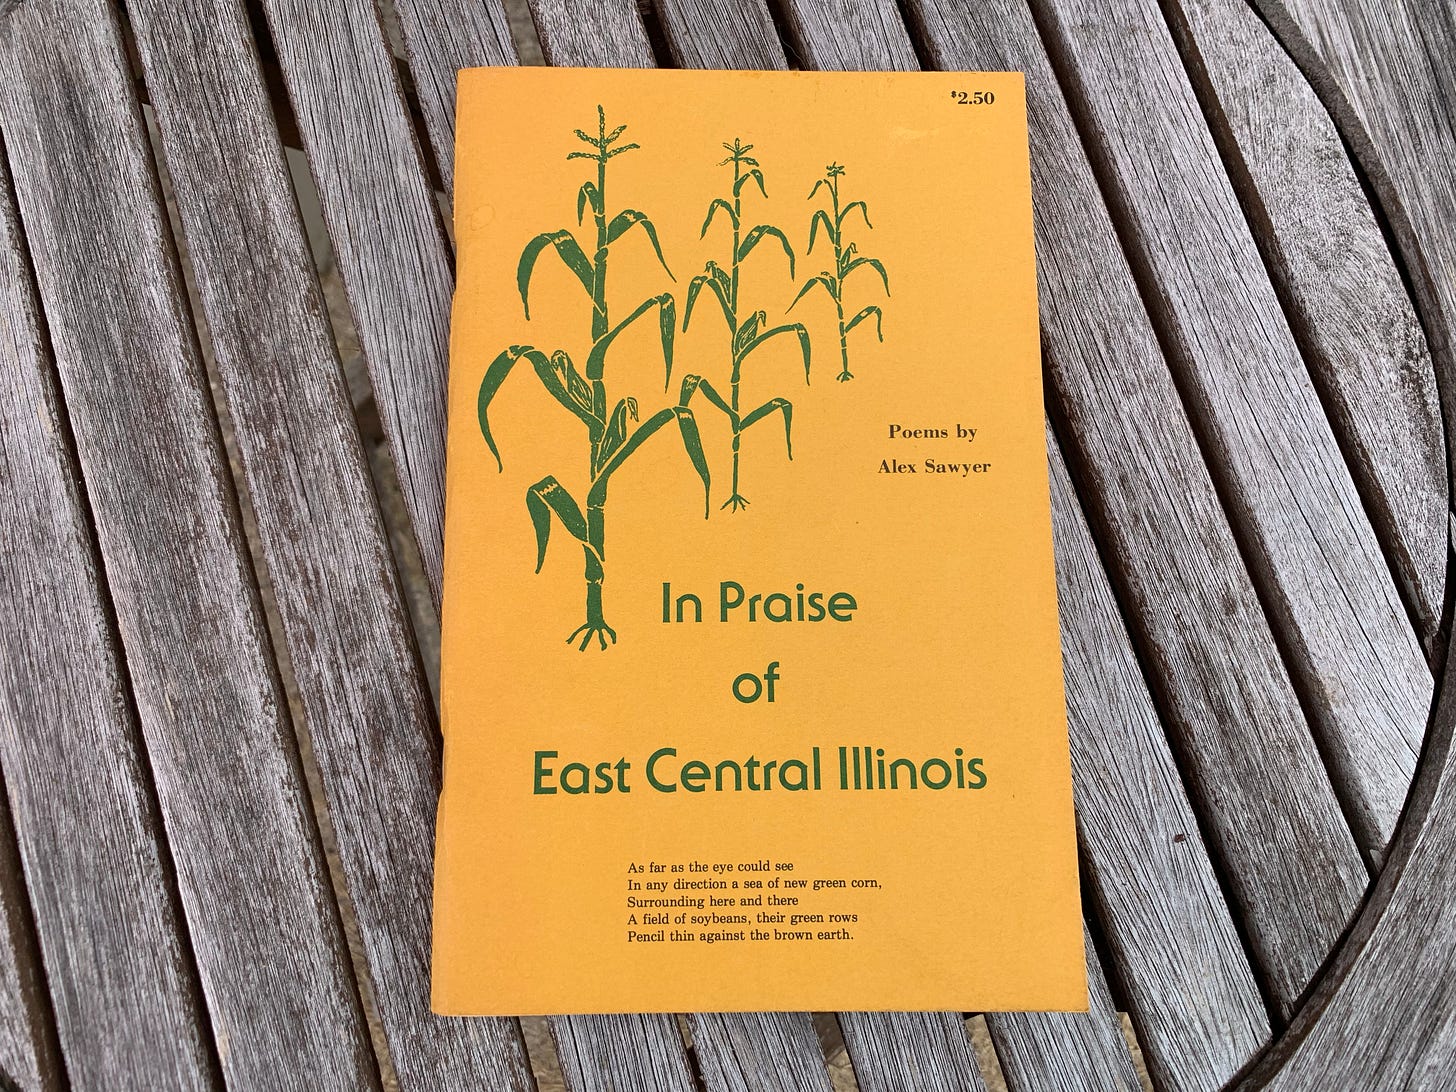 "In Praise of East Central Illinois" booklet on top of a wooden table